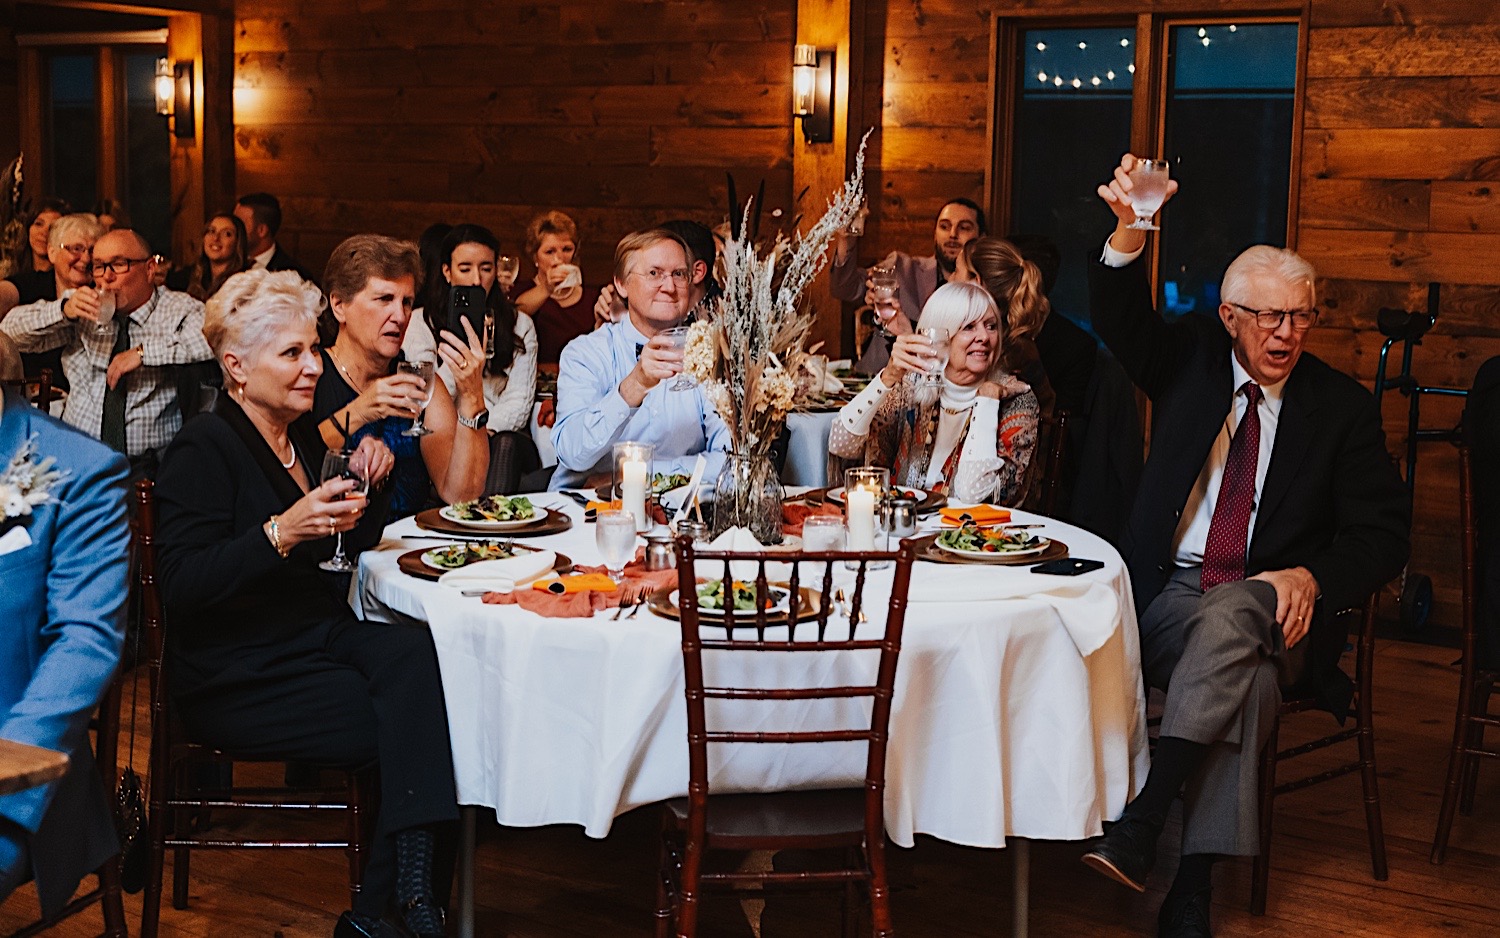 Guests of a wedding reception inside of Lake Bomoseen Lodge in Vermont raise their glasses and cheer while sitting at their table